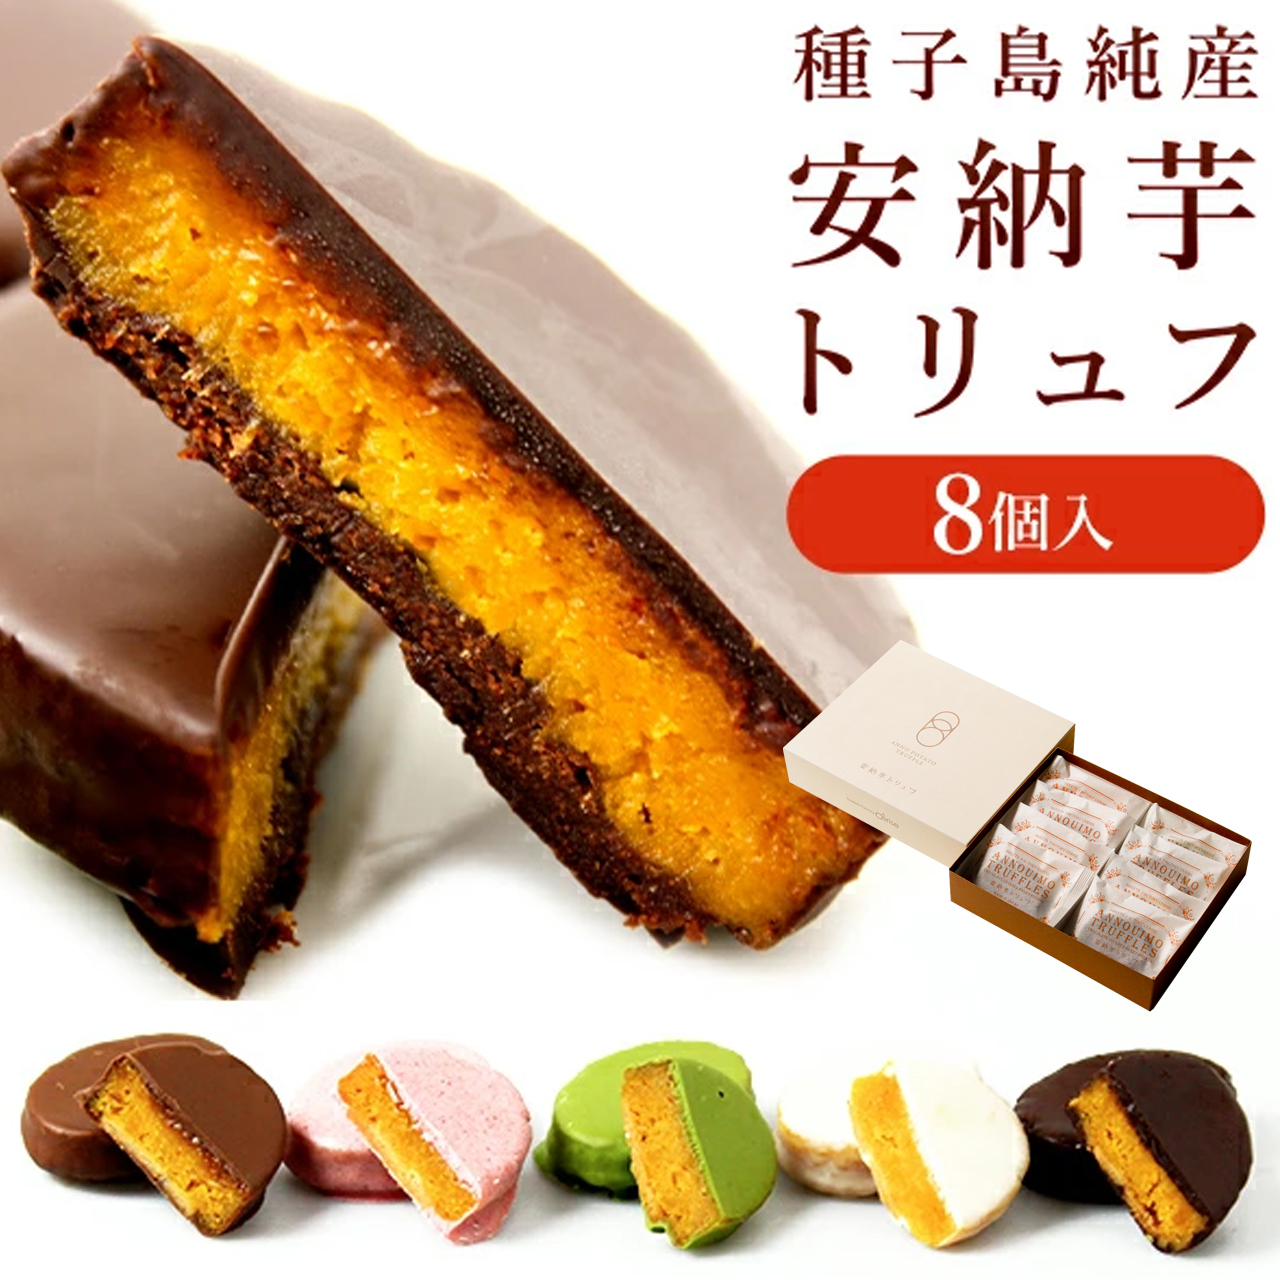  cheap . corm truffle chocolate 8 piece insertion sweets pastry Japanese confectionery confection gift birthday inside festival birth hand earth production Father's day Bon Festival gift 